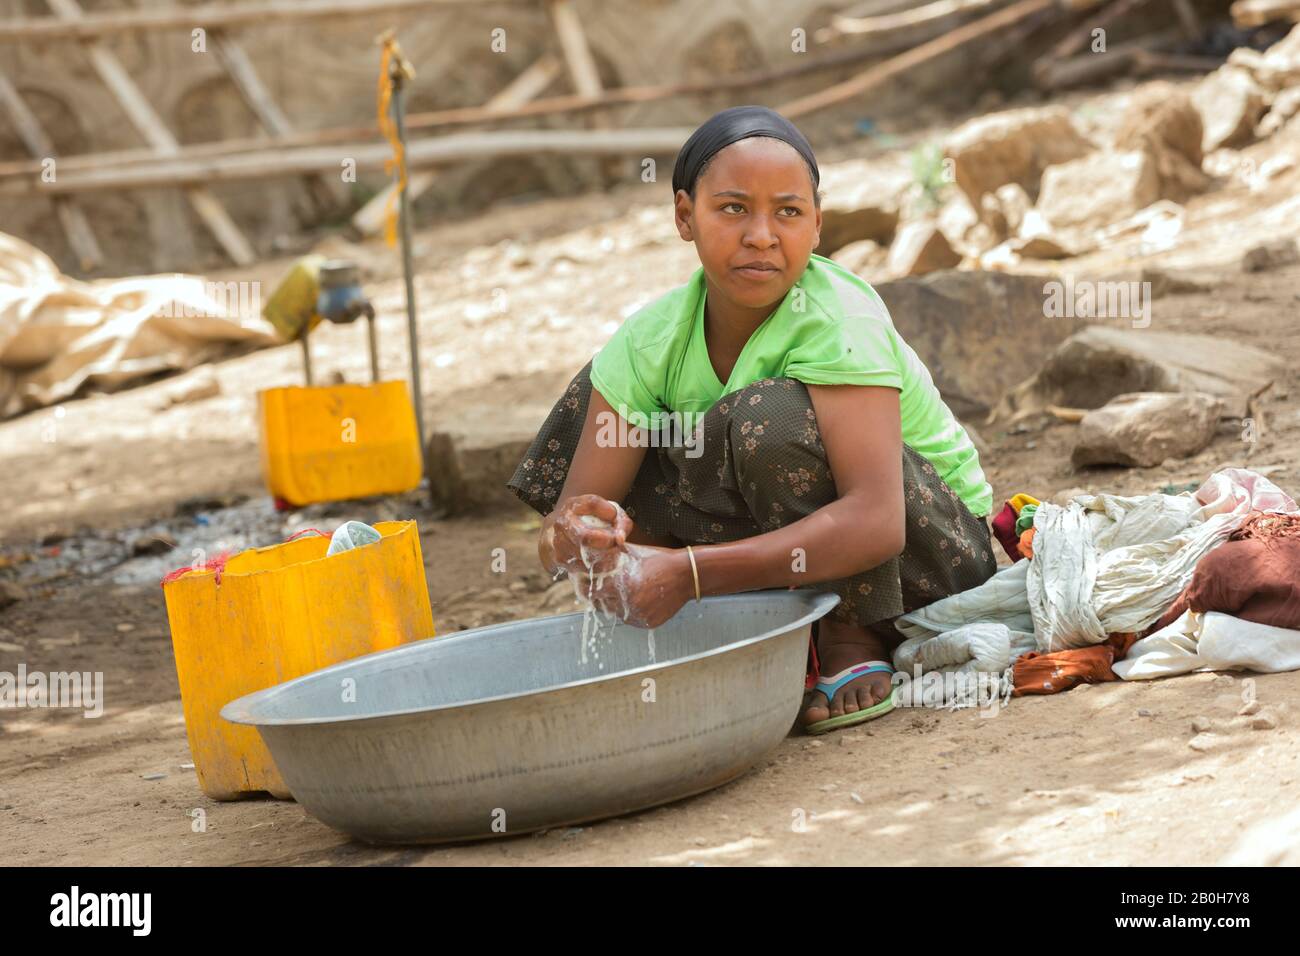 07.11.2019, Adama, Oromiyaa, Ethiopia - Washerwoman. A young woman washes laundry by hand in a metal chair. Women and Migration-Prone Youth Economic E Stock Photo